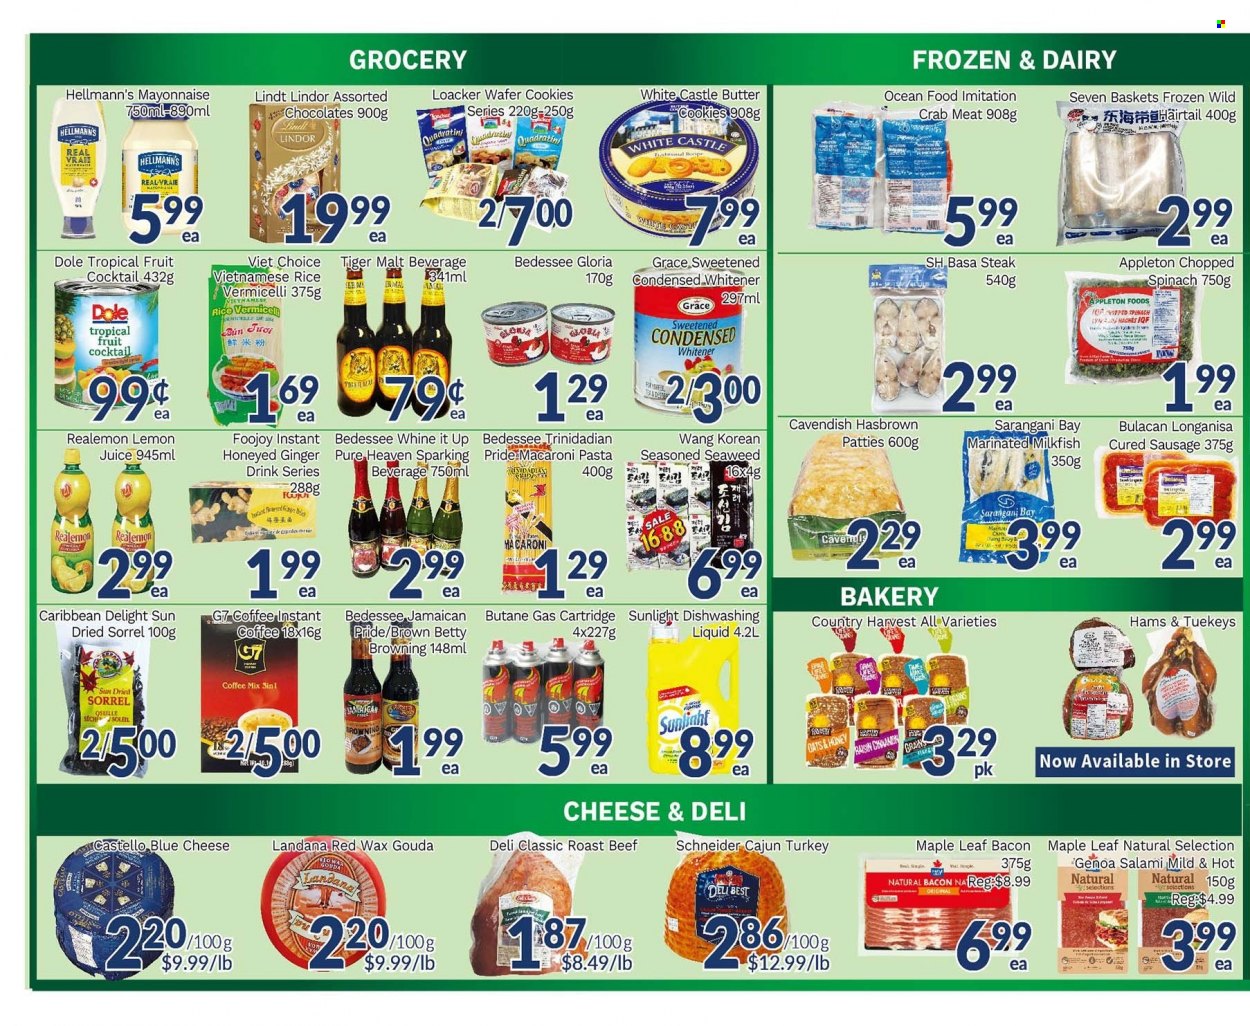 thumbnail - Oceans Flyer - December 02, 2022 - December 08, 2022 - Sales products - ginger, spinach, Dole, crab meat, crab, milkfish, macaroni, pasta, bacon, salami, sausage, blue cheese, gouda, mayonnaise, Hellmann’s, Country Harvest, cookies, wafers, chocolate, butter cookies, seaweed, malt, rice, rice vermicelli, honey, lemon juice, tea, coffee, instant coffee, Castle, beef meat, roast beef, Sunlight, steak, Lindt, Lindor. Page 3.